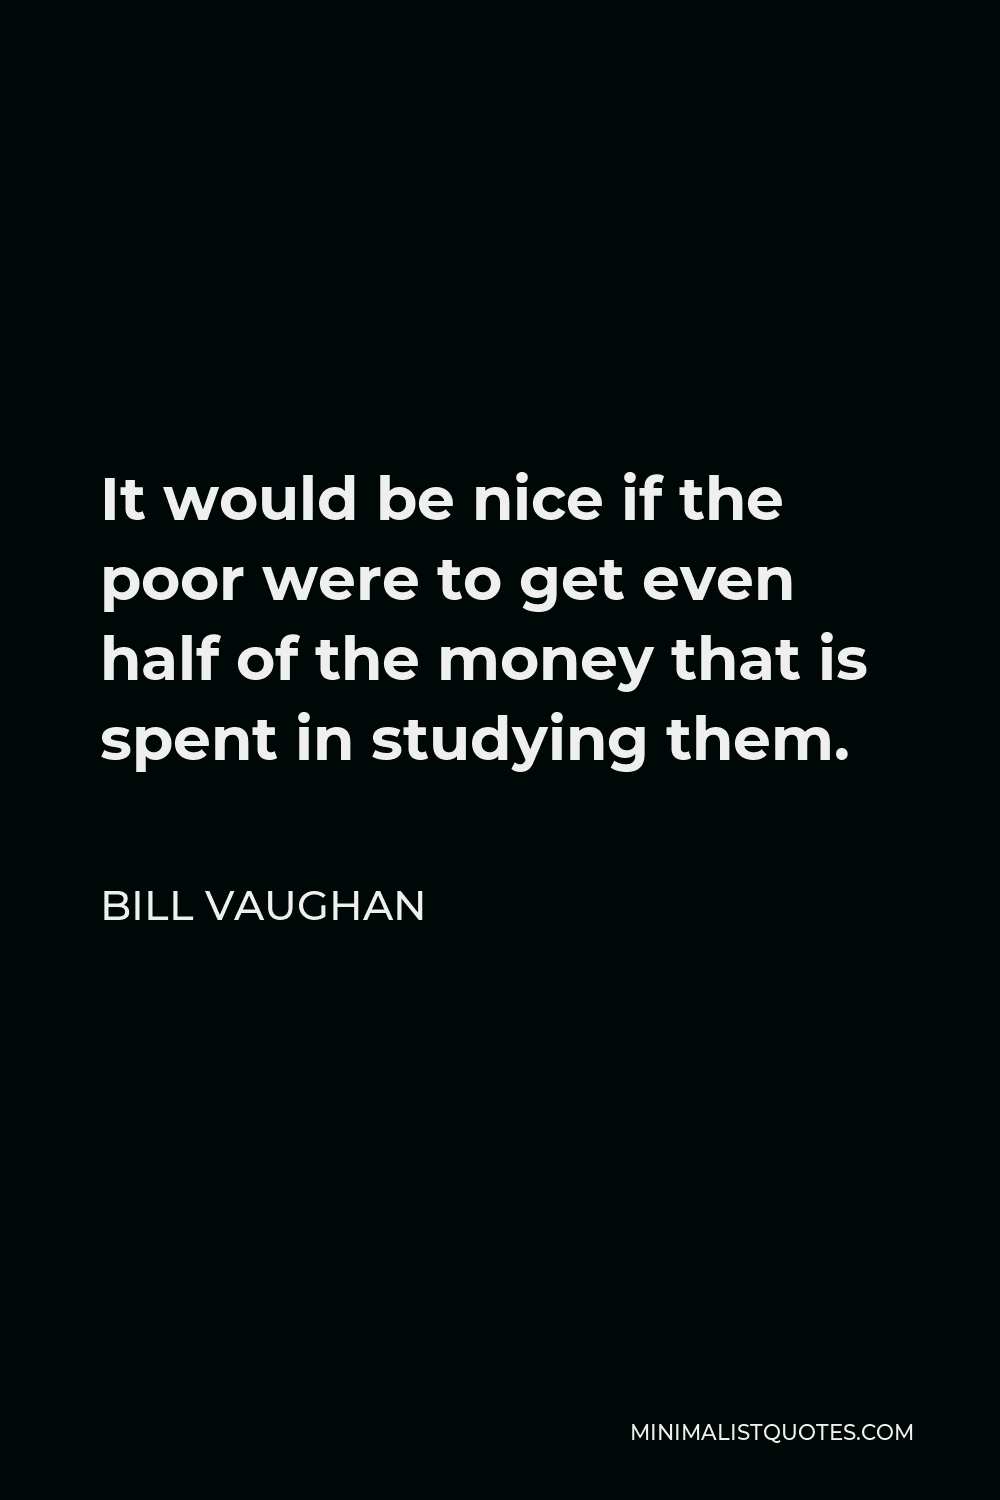 Bill Vaughan Quote - It would be nice if the poor were to get even half of the money that is spent in studying them.